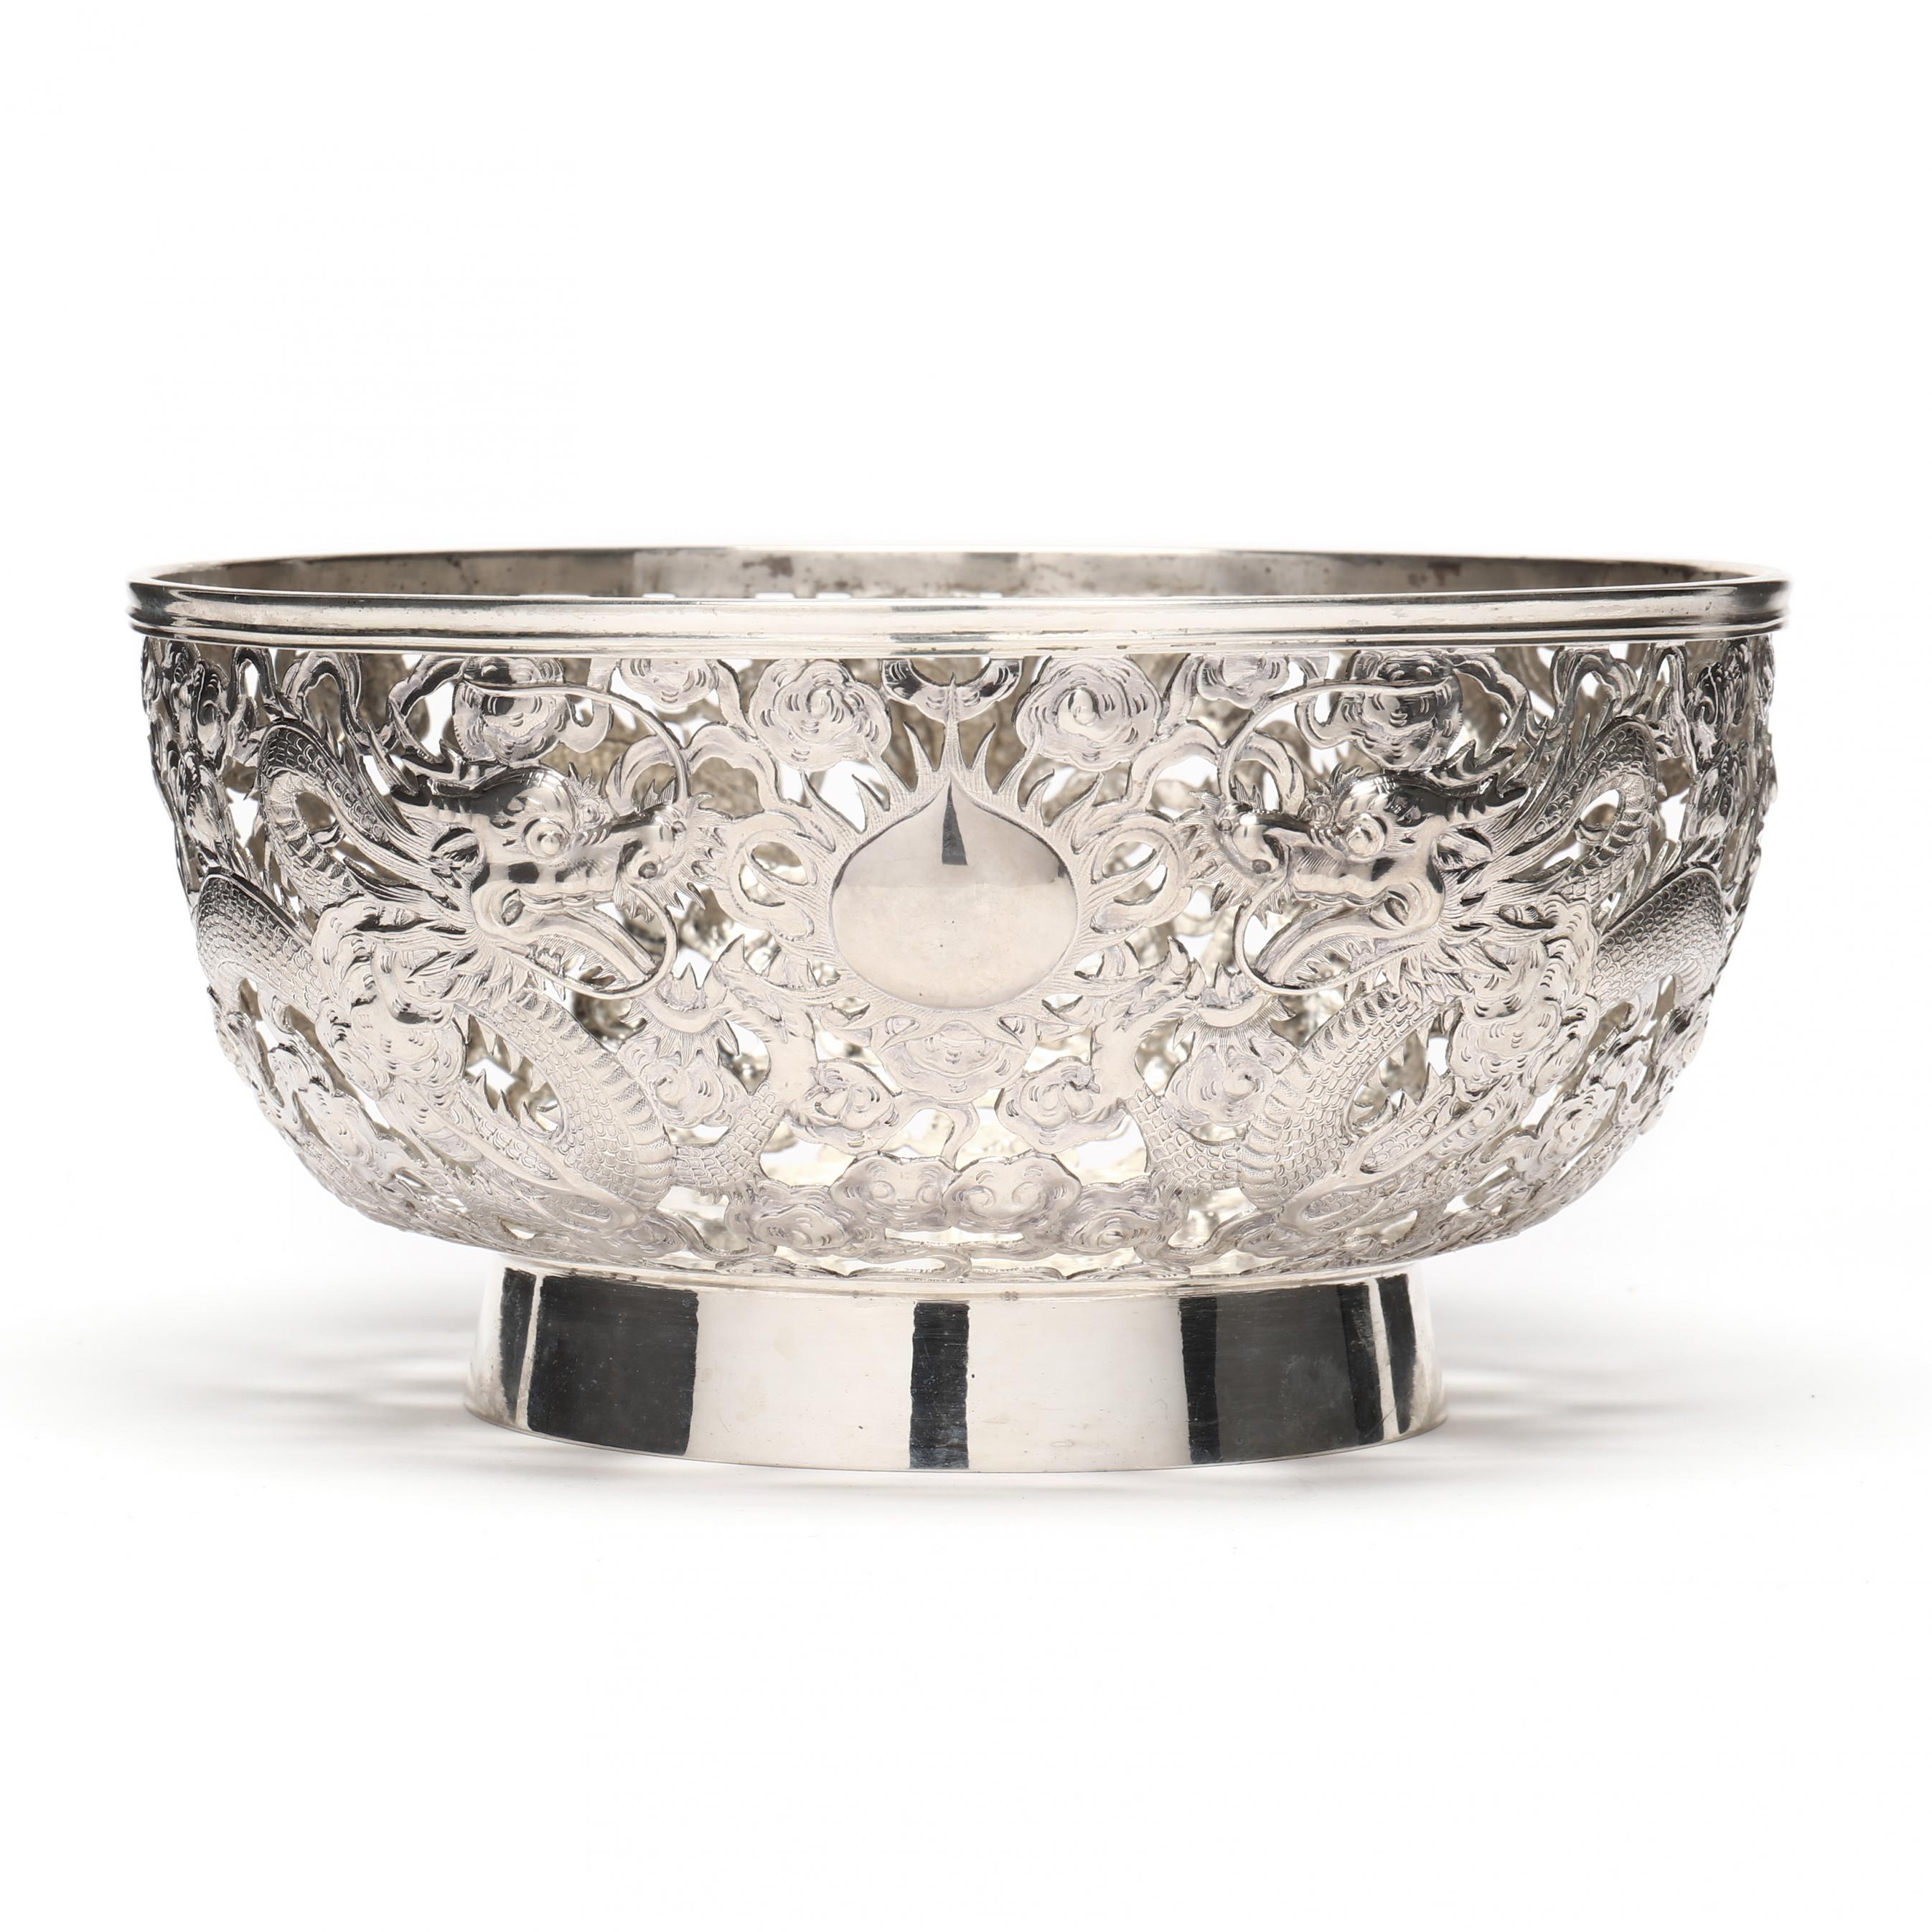 A Chinese Export Silver Dragon Bowl, Mark of Sing Fat and Wing Fat 